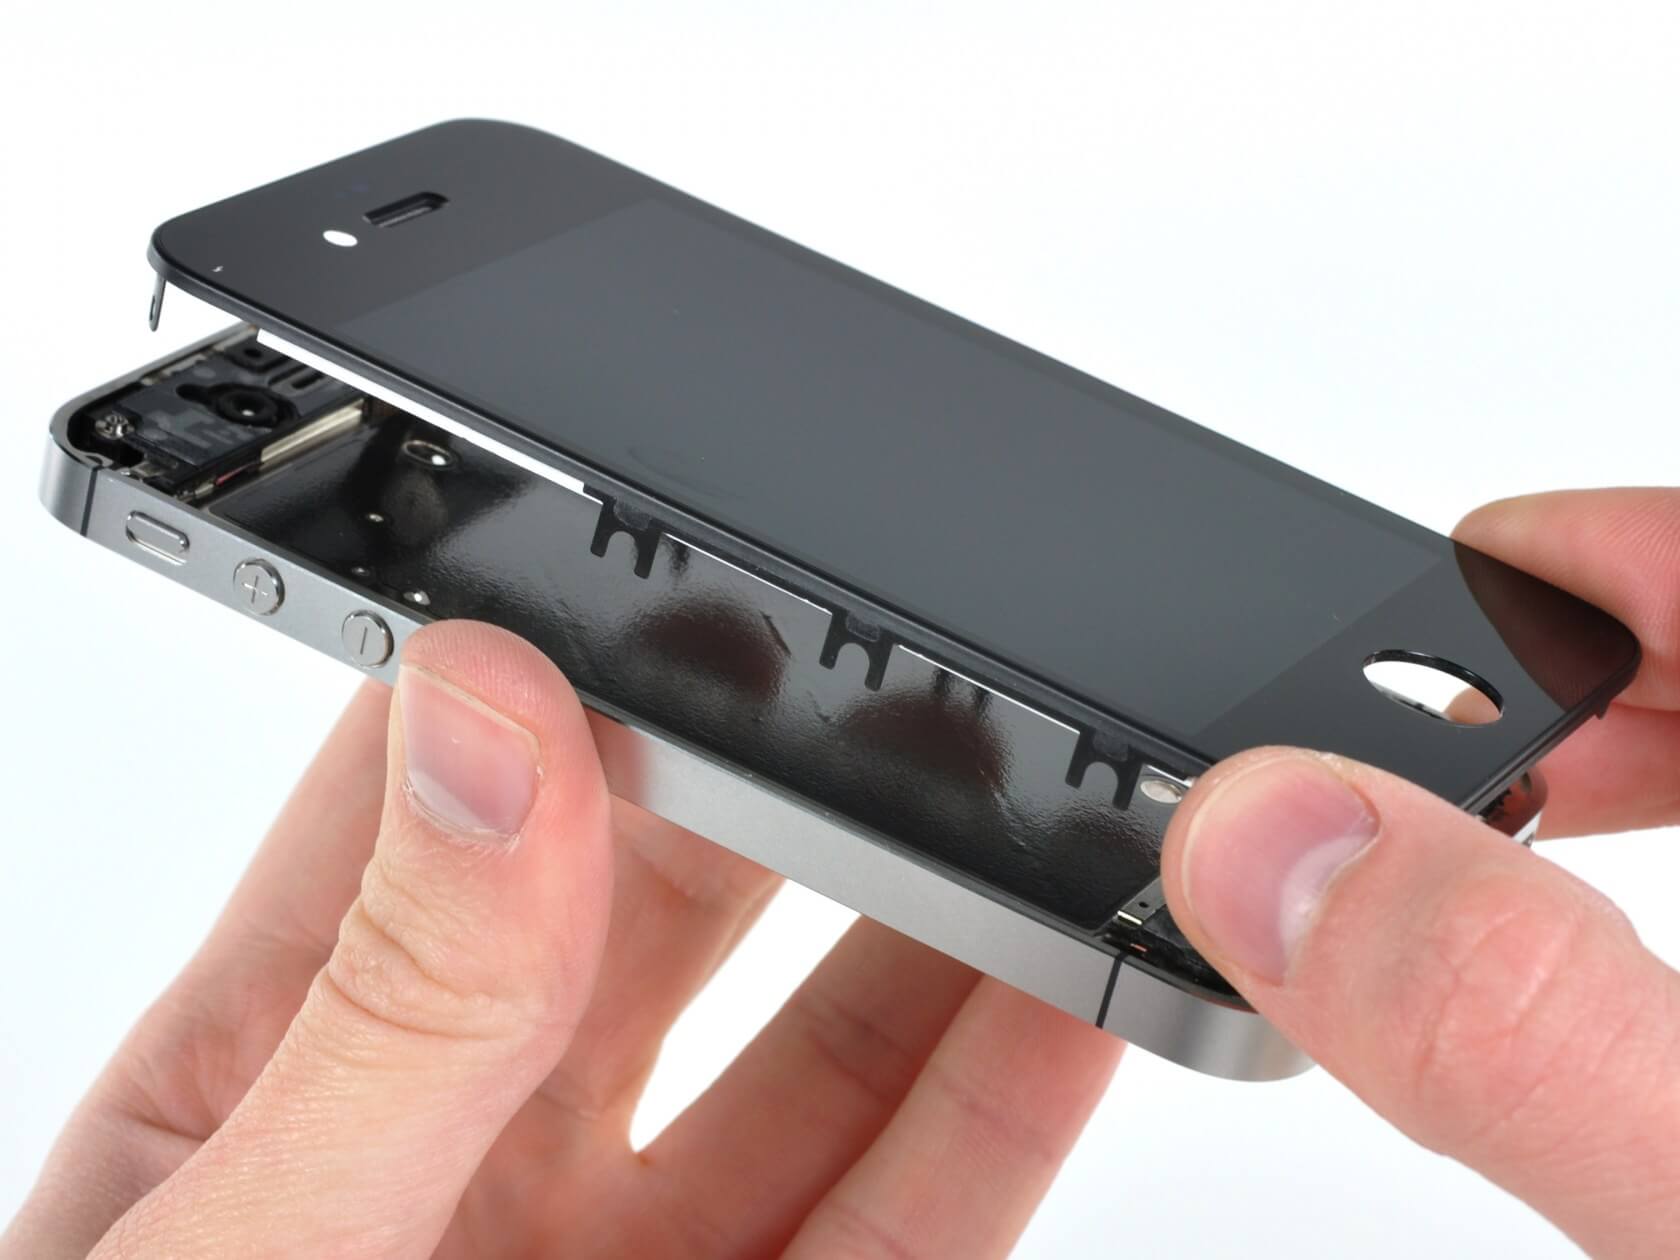 Apple is reportedly adding additional products to its 'vintage' device repair program